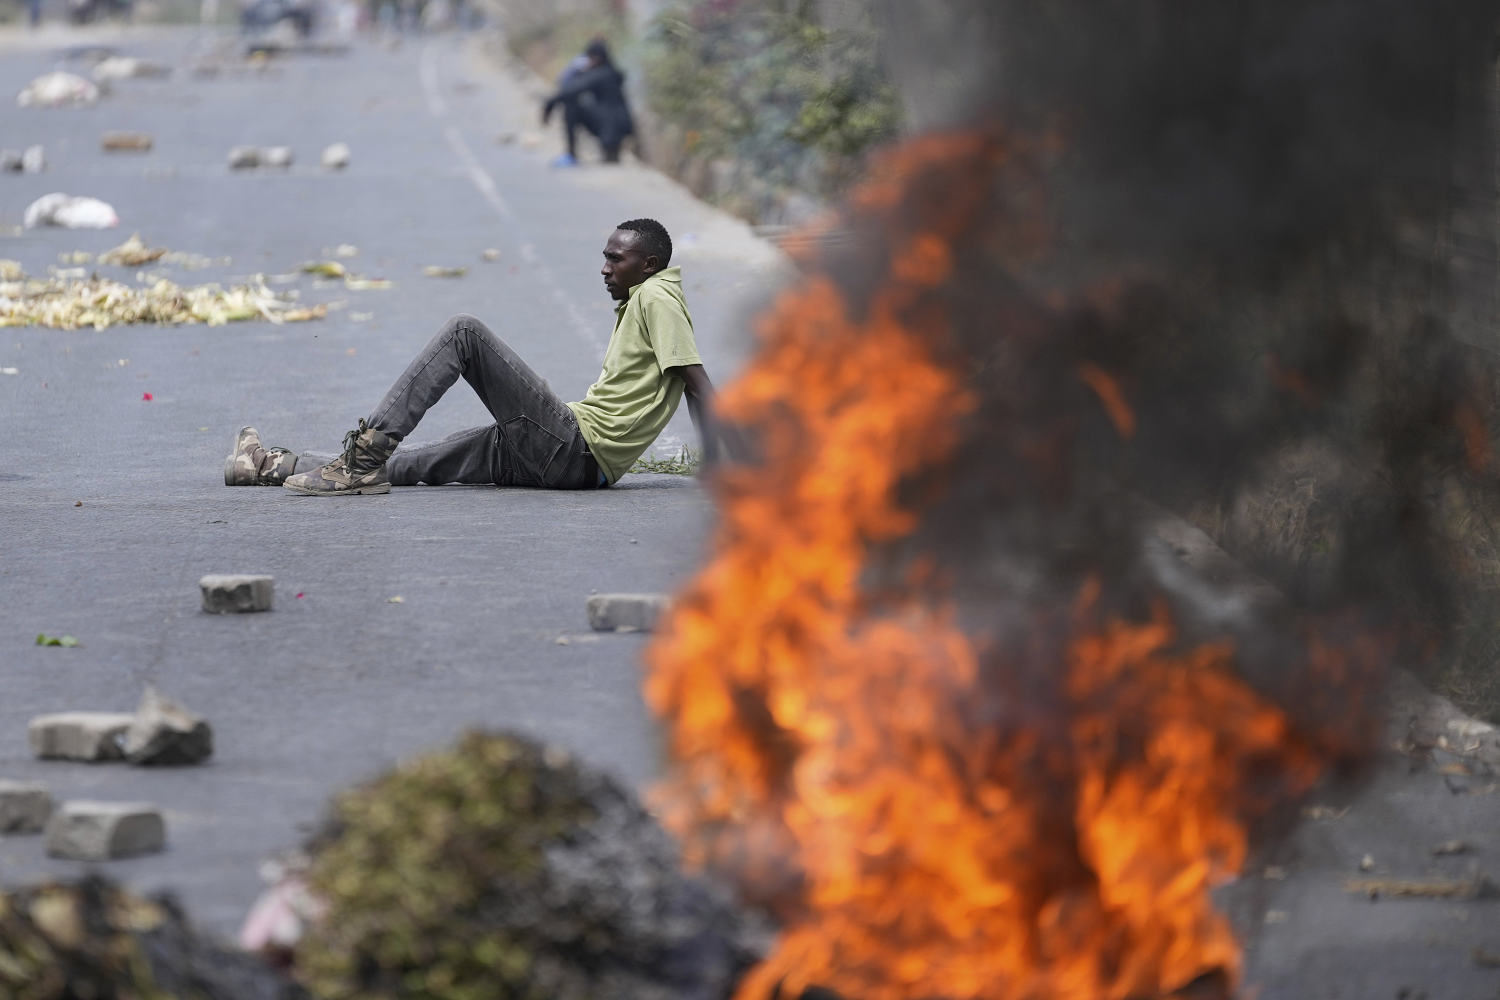 Tear gas, stones and flames as violence erupts in Kenya and protesters call for president's ouster